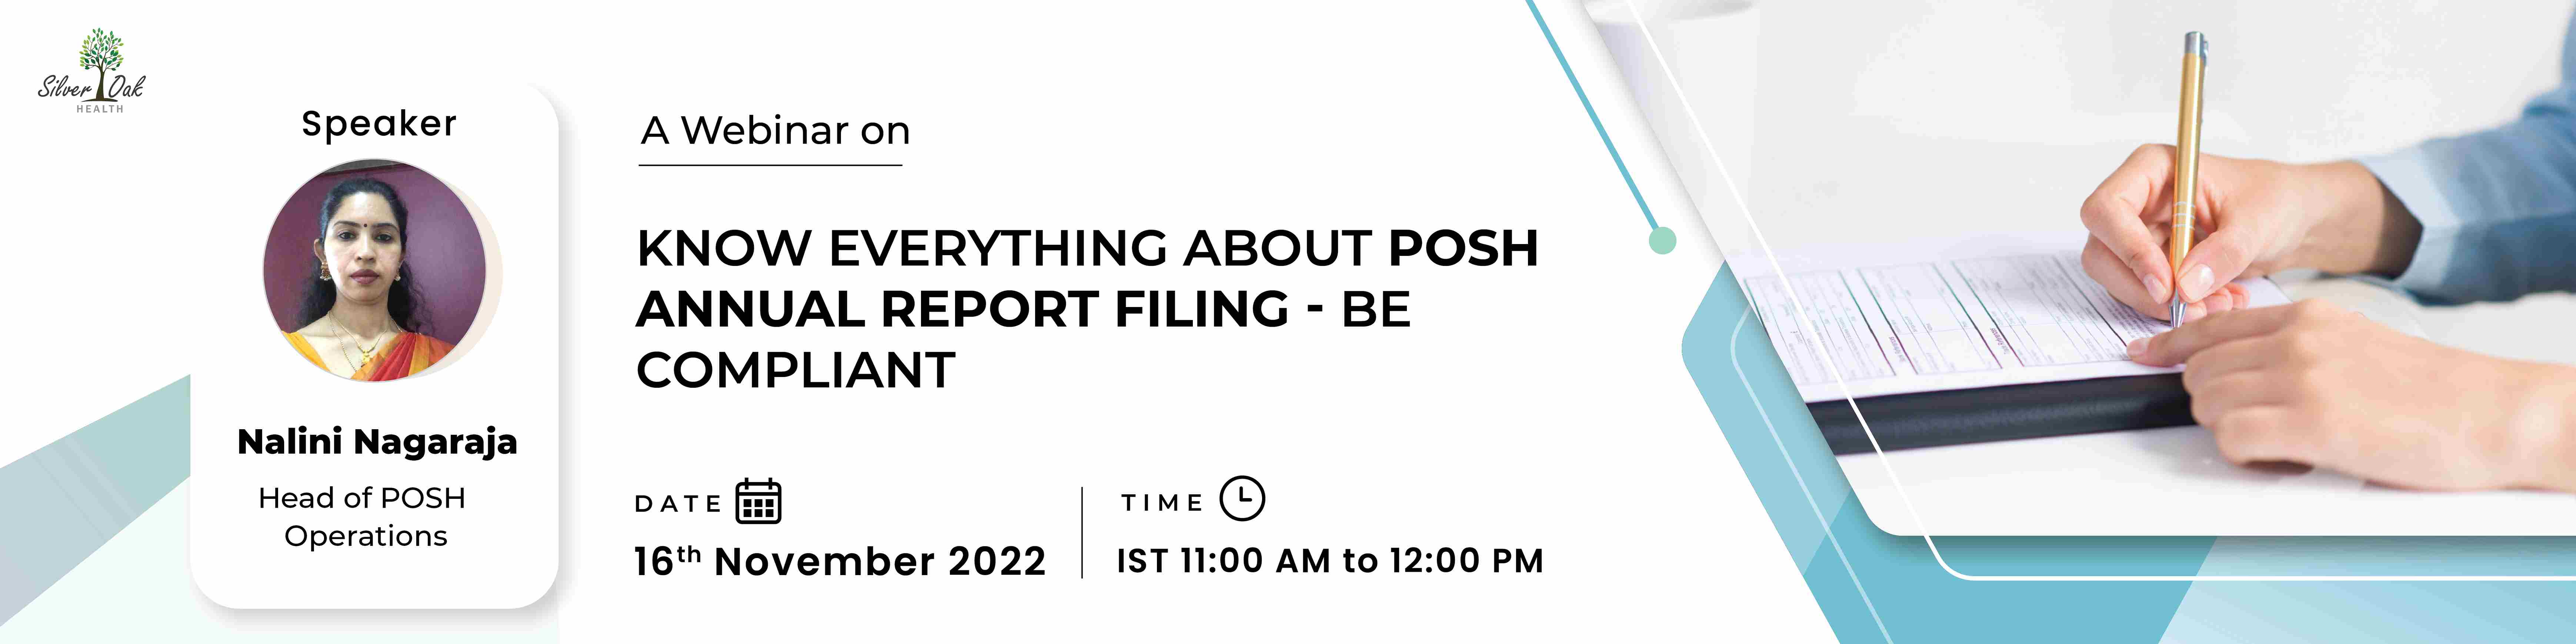 Know Everything about POSH Annual Report Filing – Be Compliant, Online Event